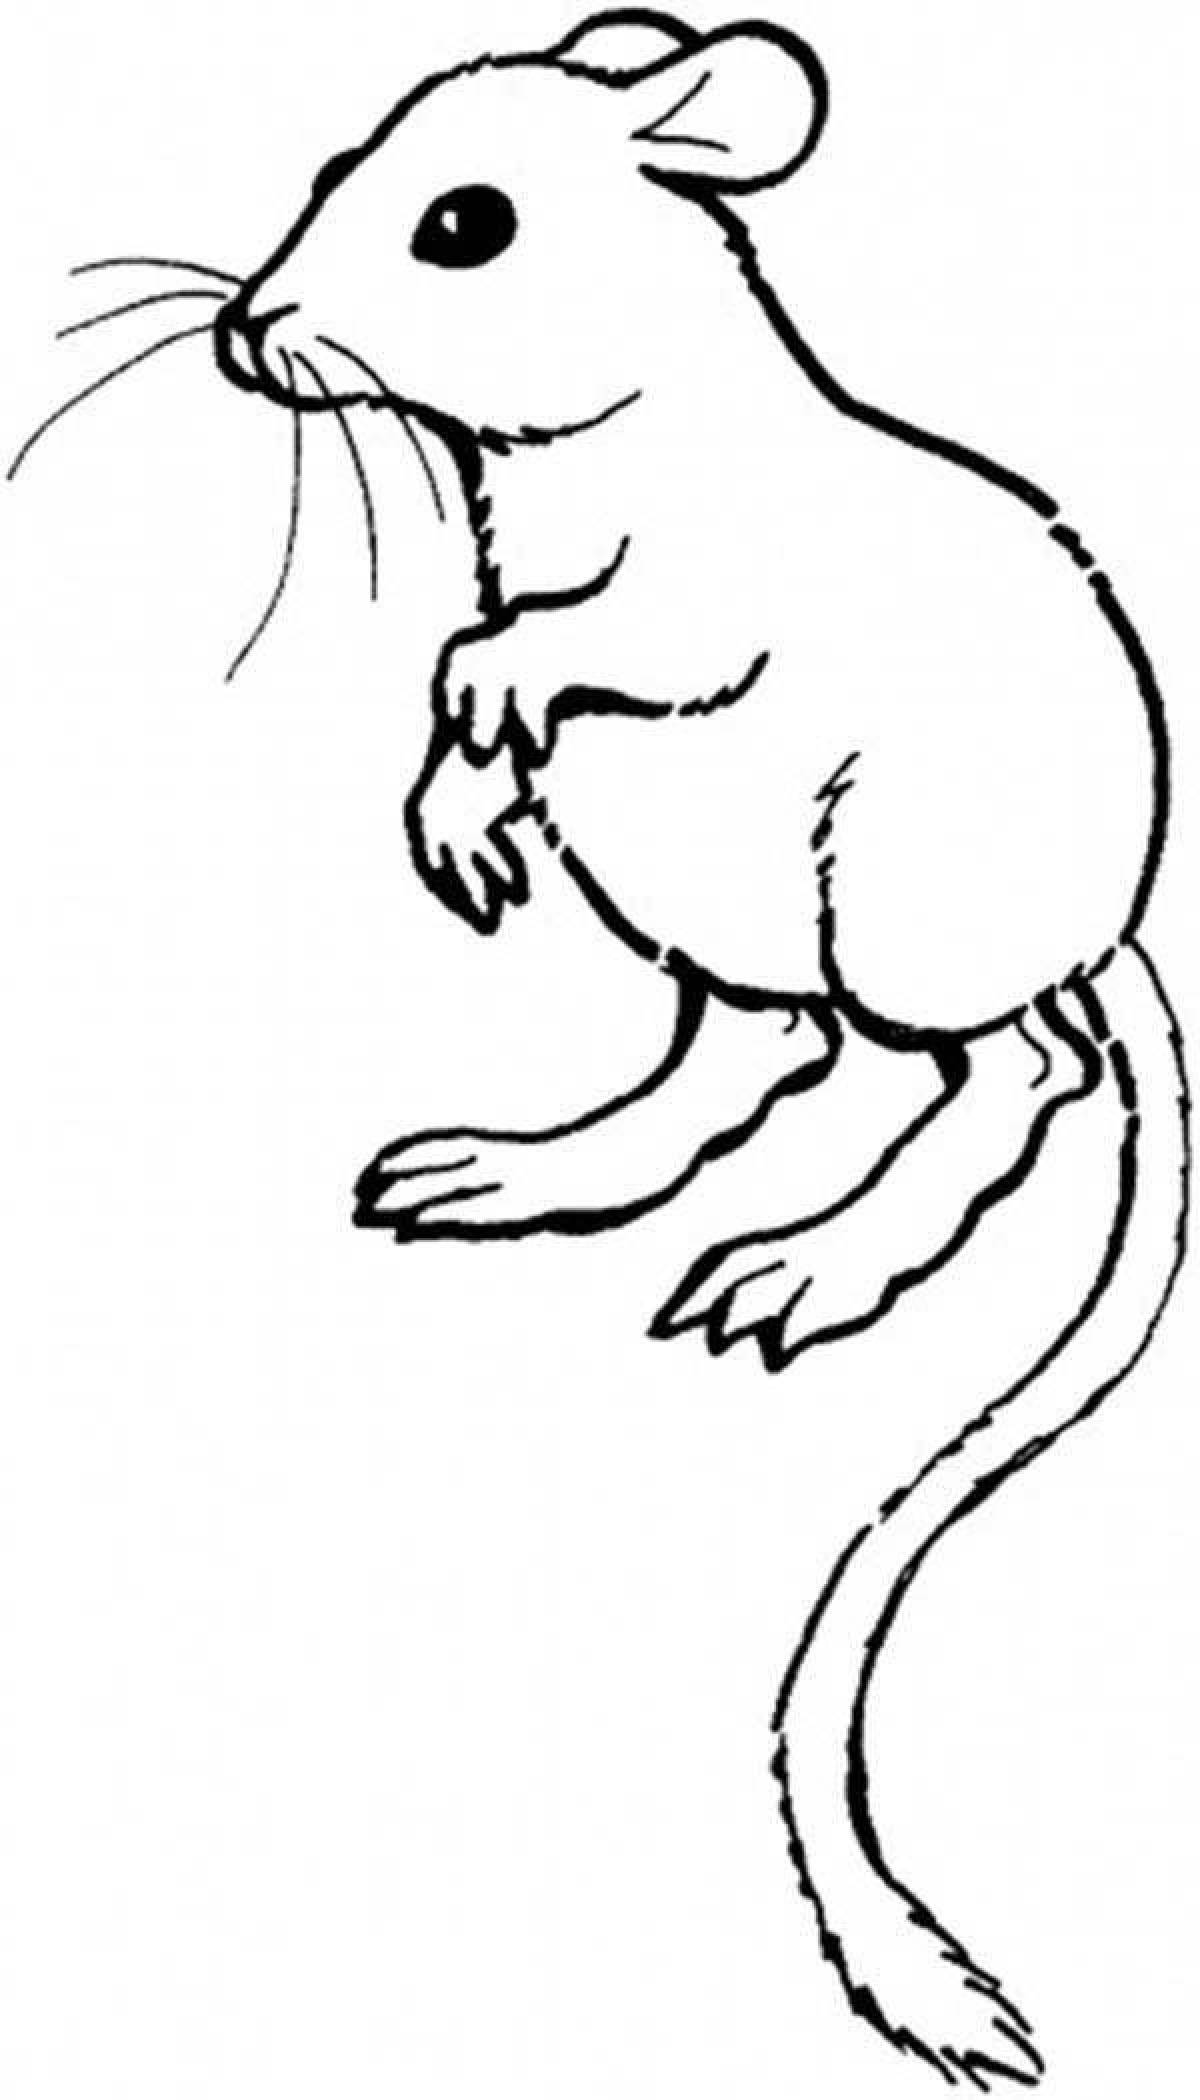 Coloring page playful jerboa